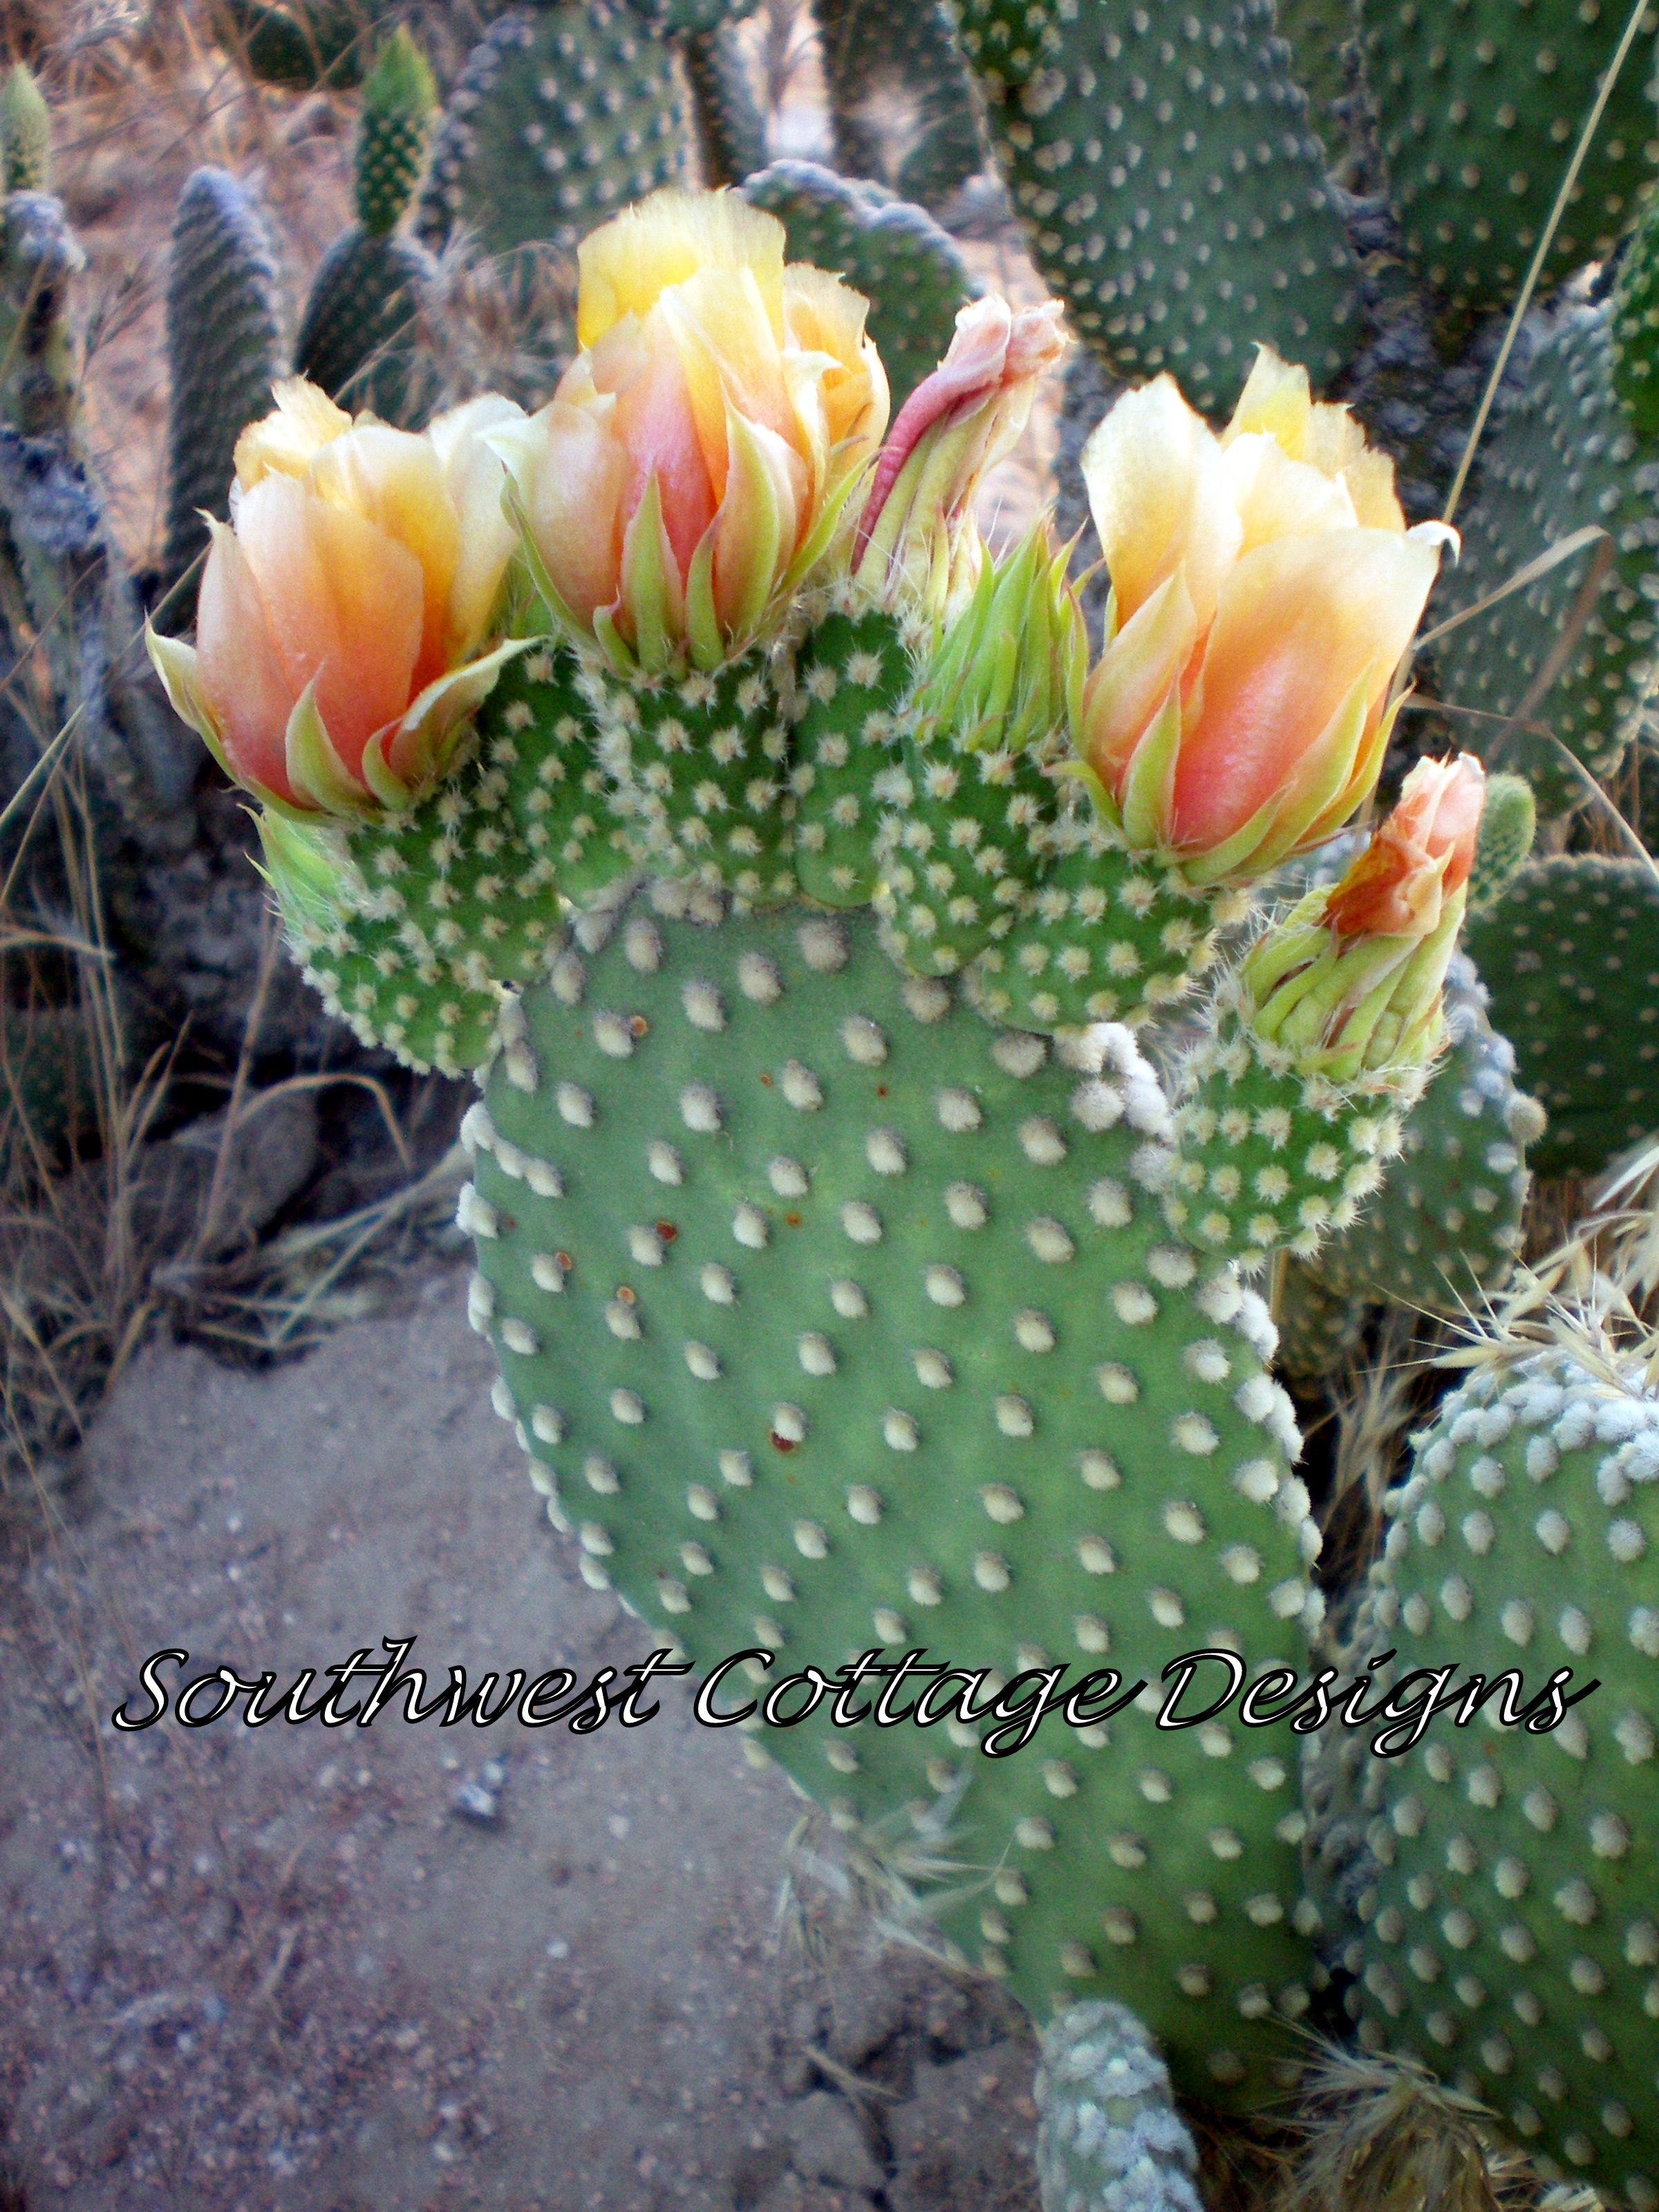 Thorny cactus pads, either green or purple, are flat vegetables ...